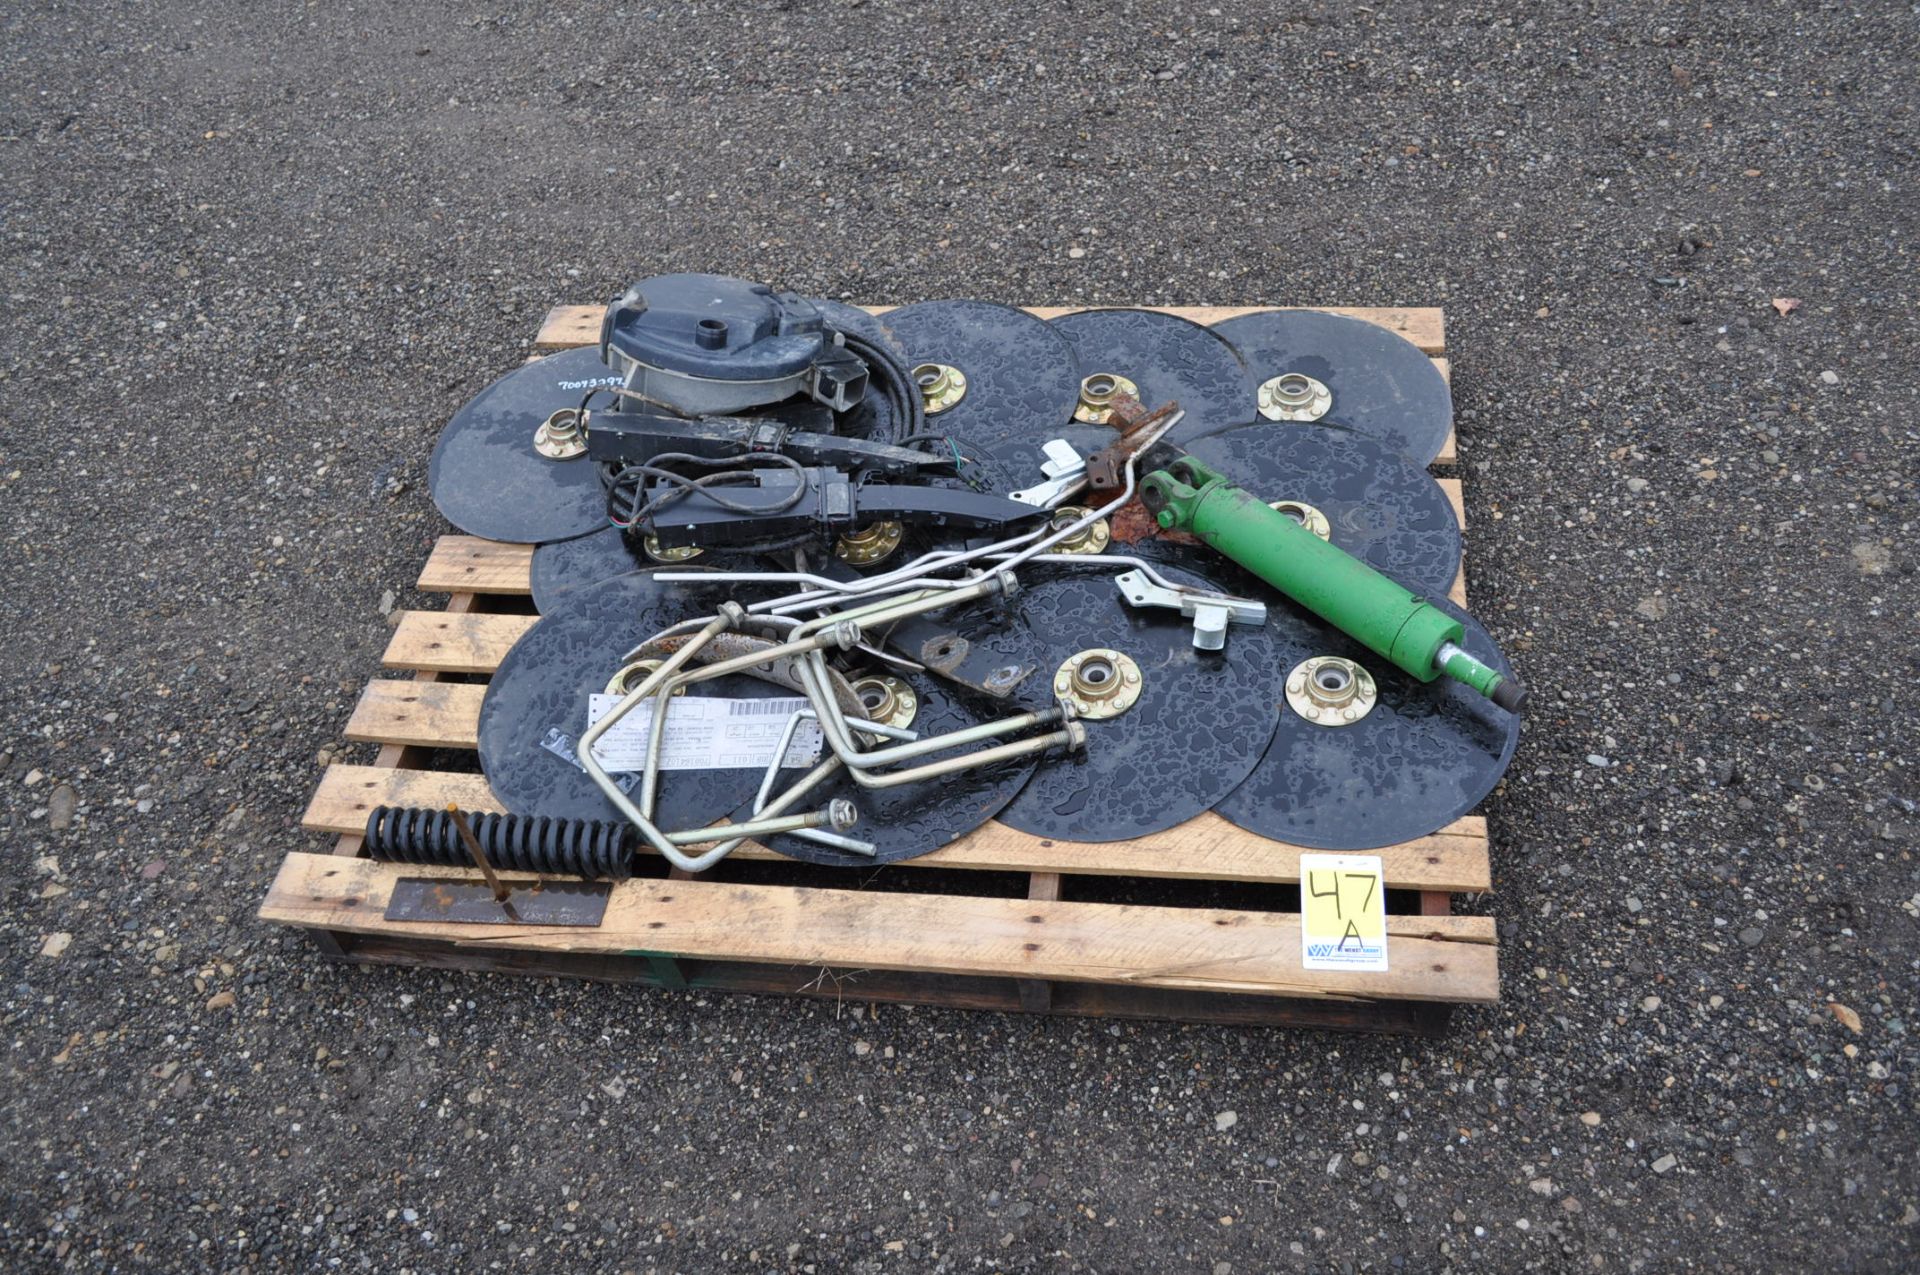 Spare John Deere planter parts, seed tubes with sensors, meter, hyd cyl, disc opener blades